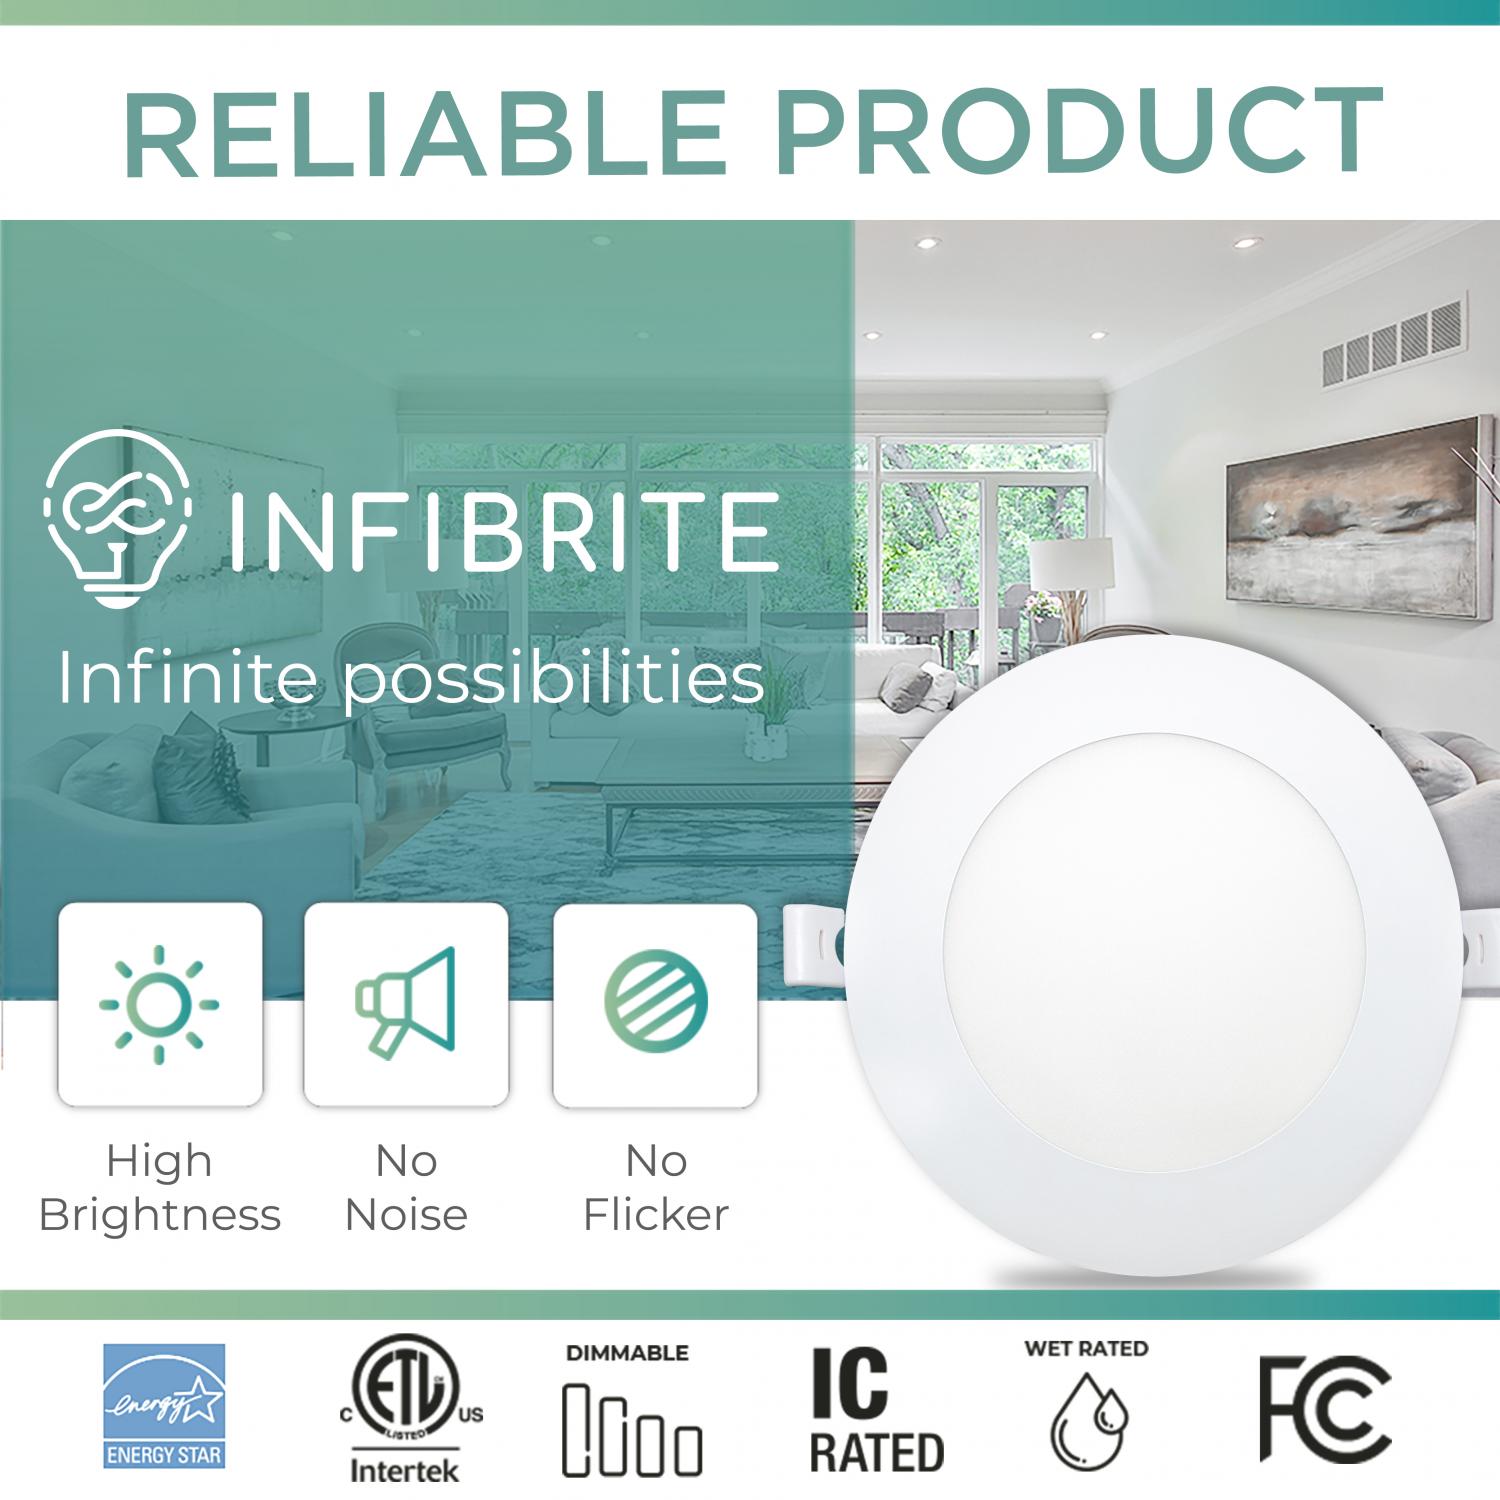 Infibrite 6 Inch 3000K Warm White 12W 1050LM Ultra-Slim LED Ceiling Light with Junction Box, Flush Mount, Dimmable, Fixture for Bedroom, Wet Rated for Bathroom, Easy Install, 110W Eqv, ETL & Energy Star, US Company (12 Pack)